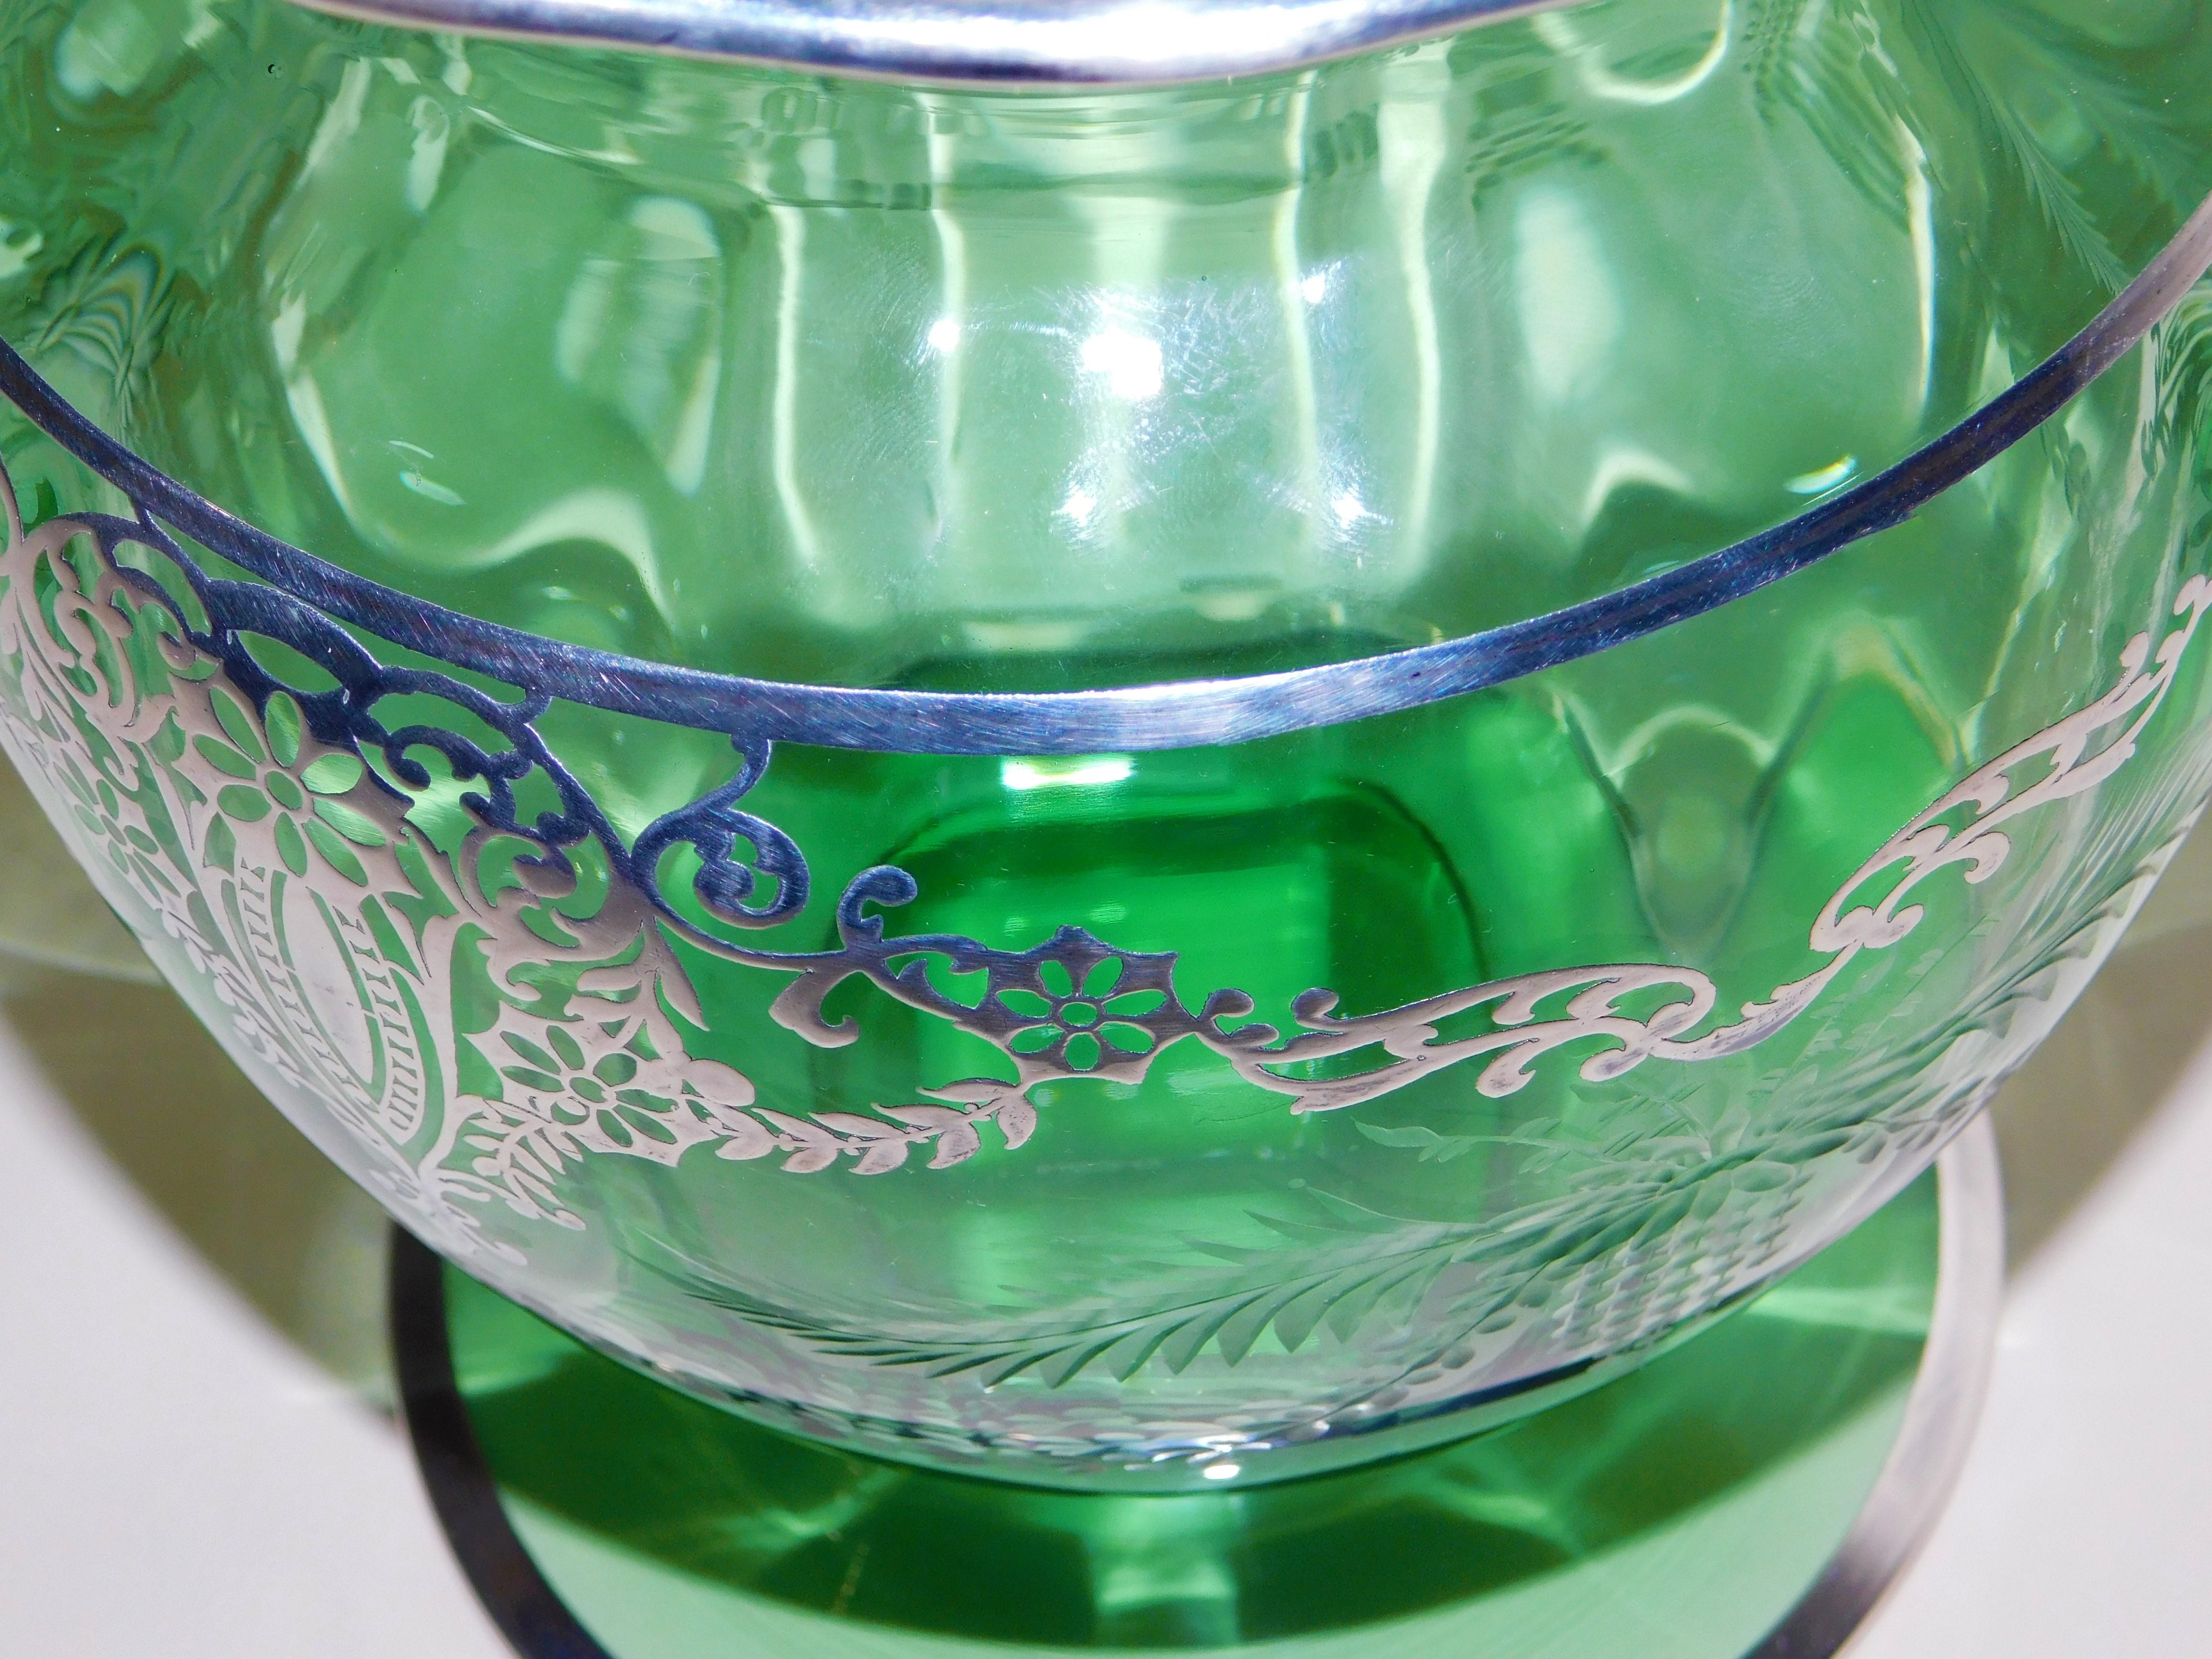 American Wheeled Cut Green Glass Vase with Silver Overlay, circa 1920s For Sale 7